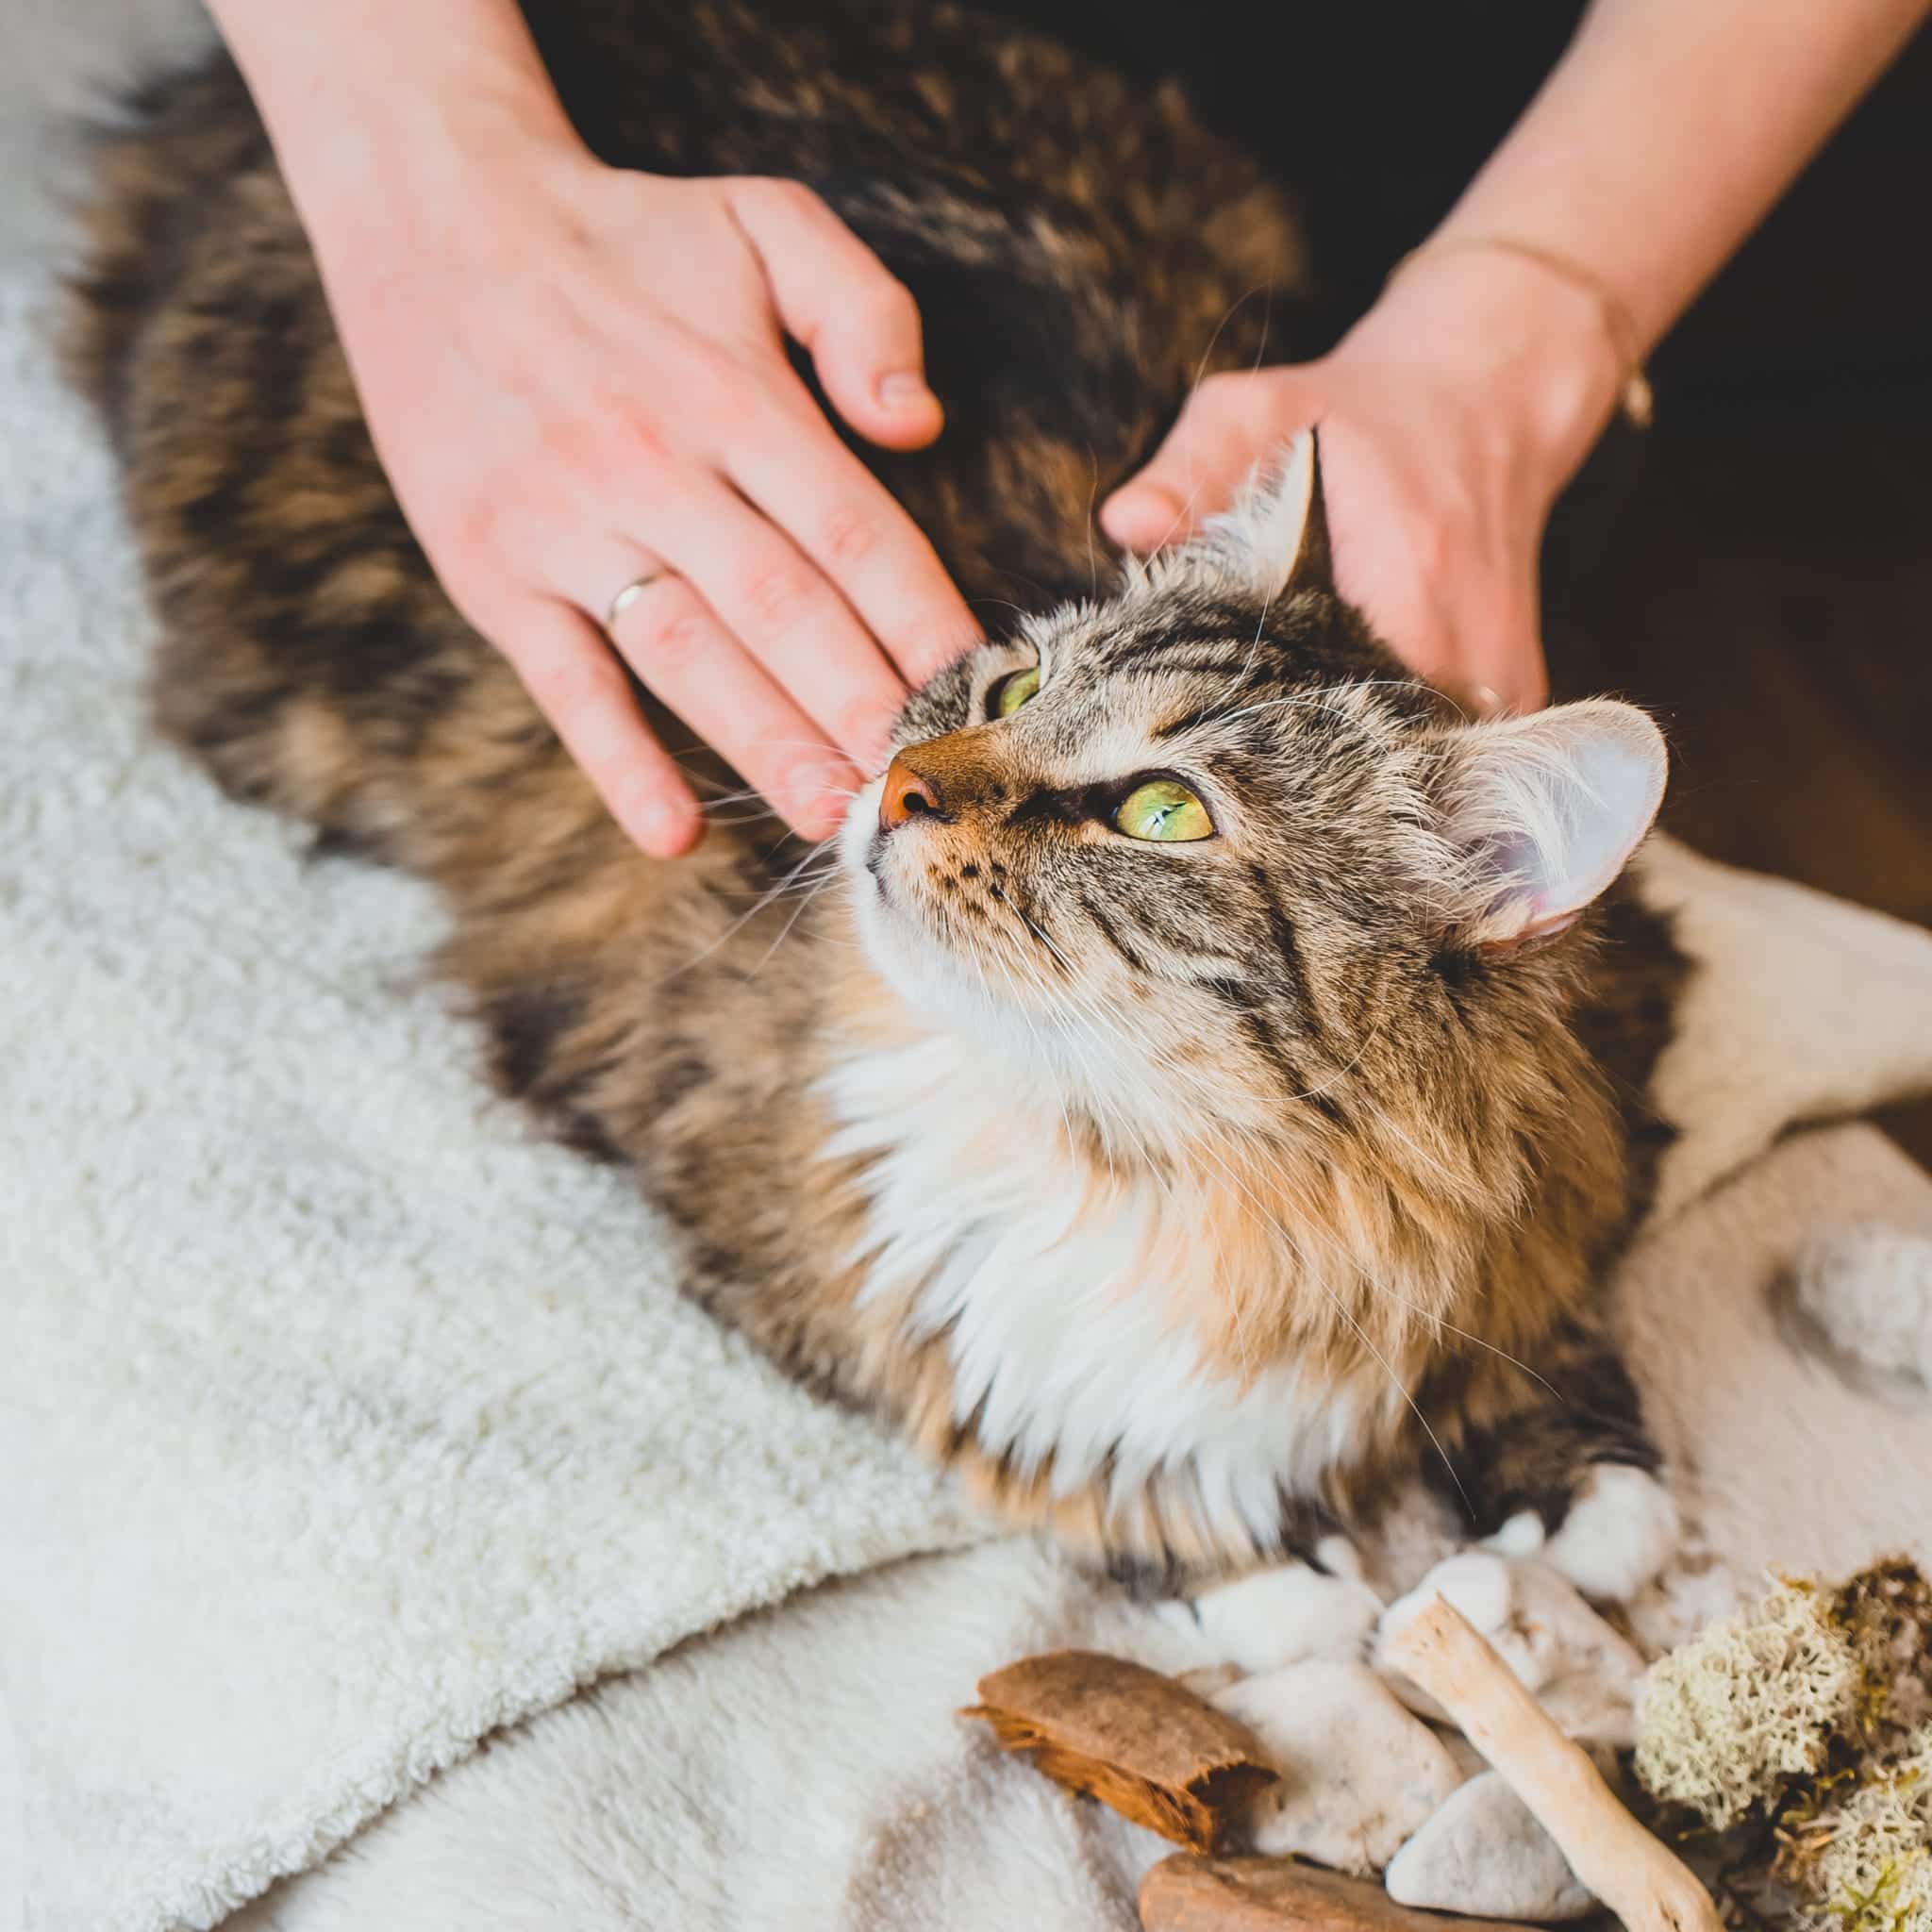 Early Care and Planning for your Aging Pet